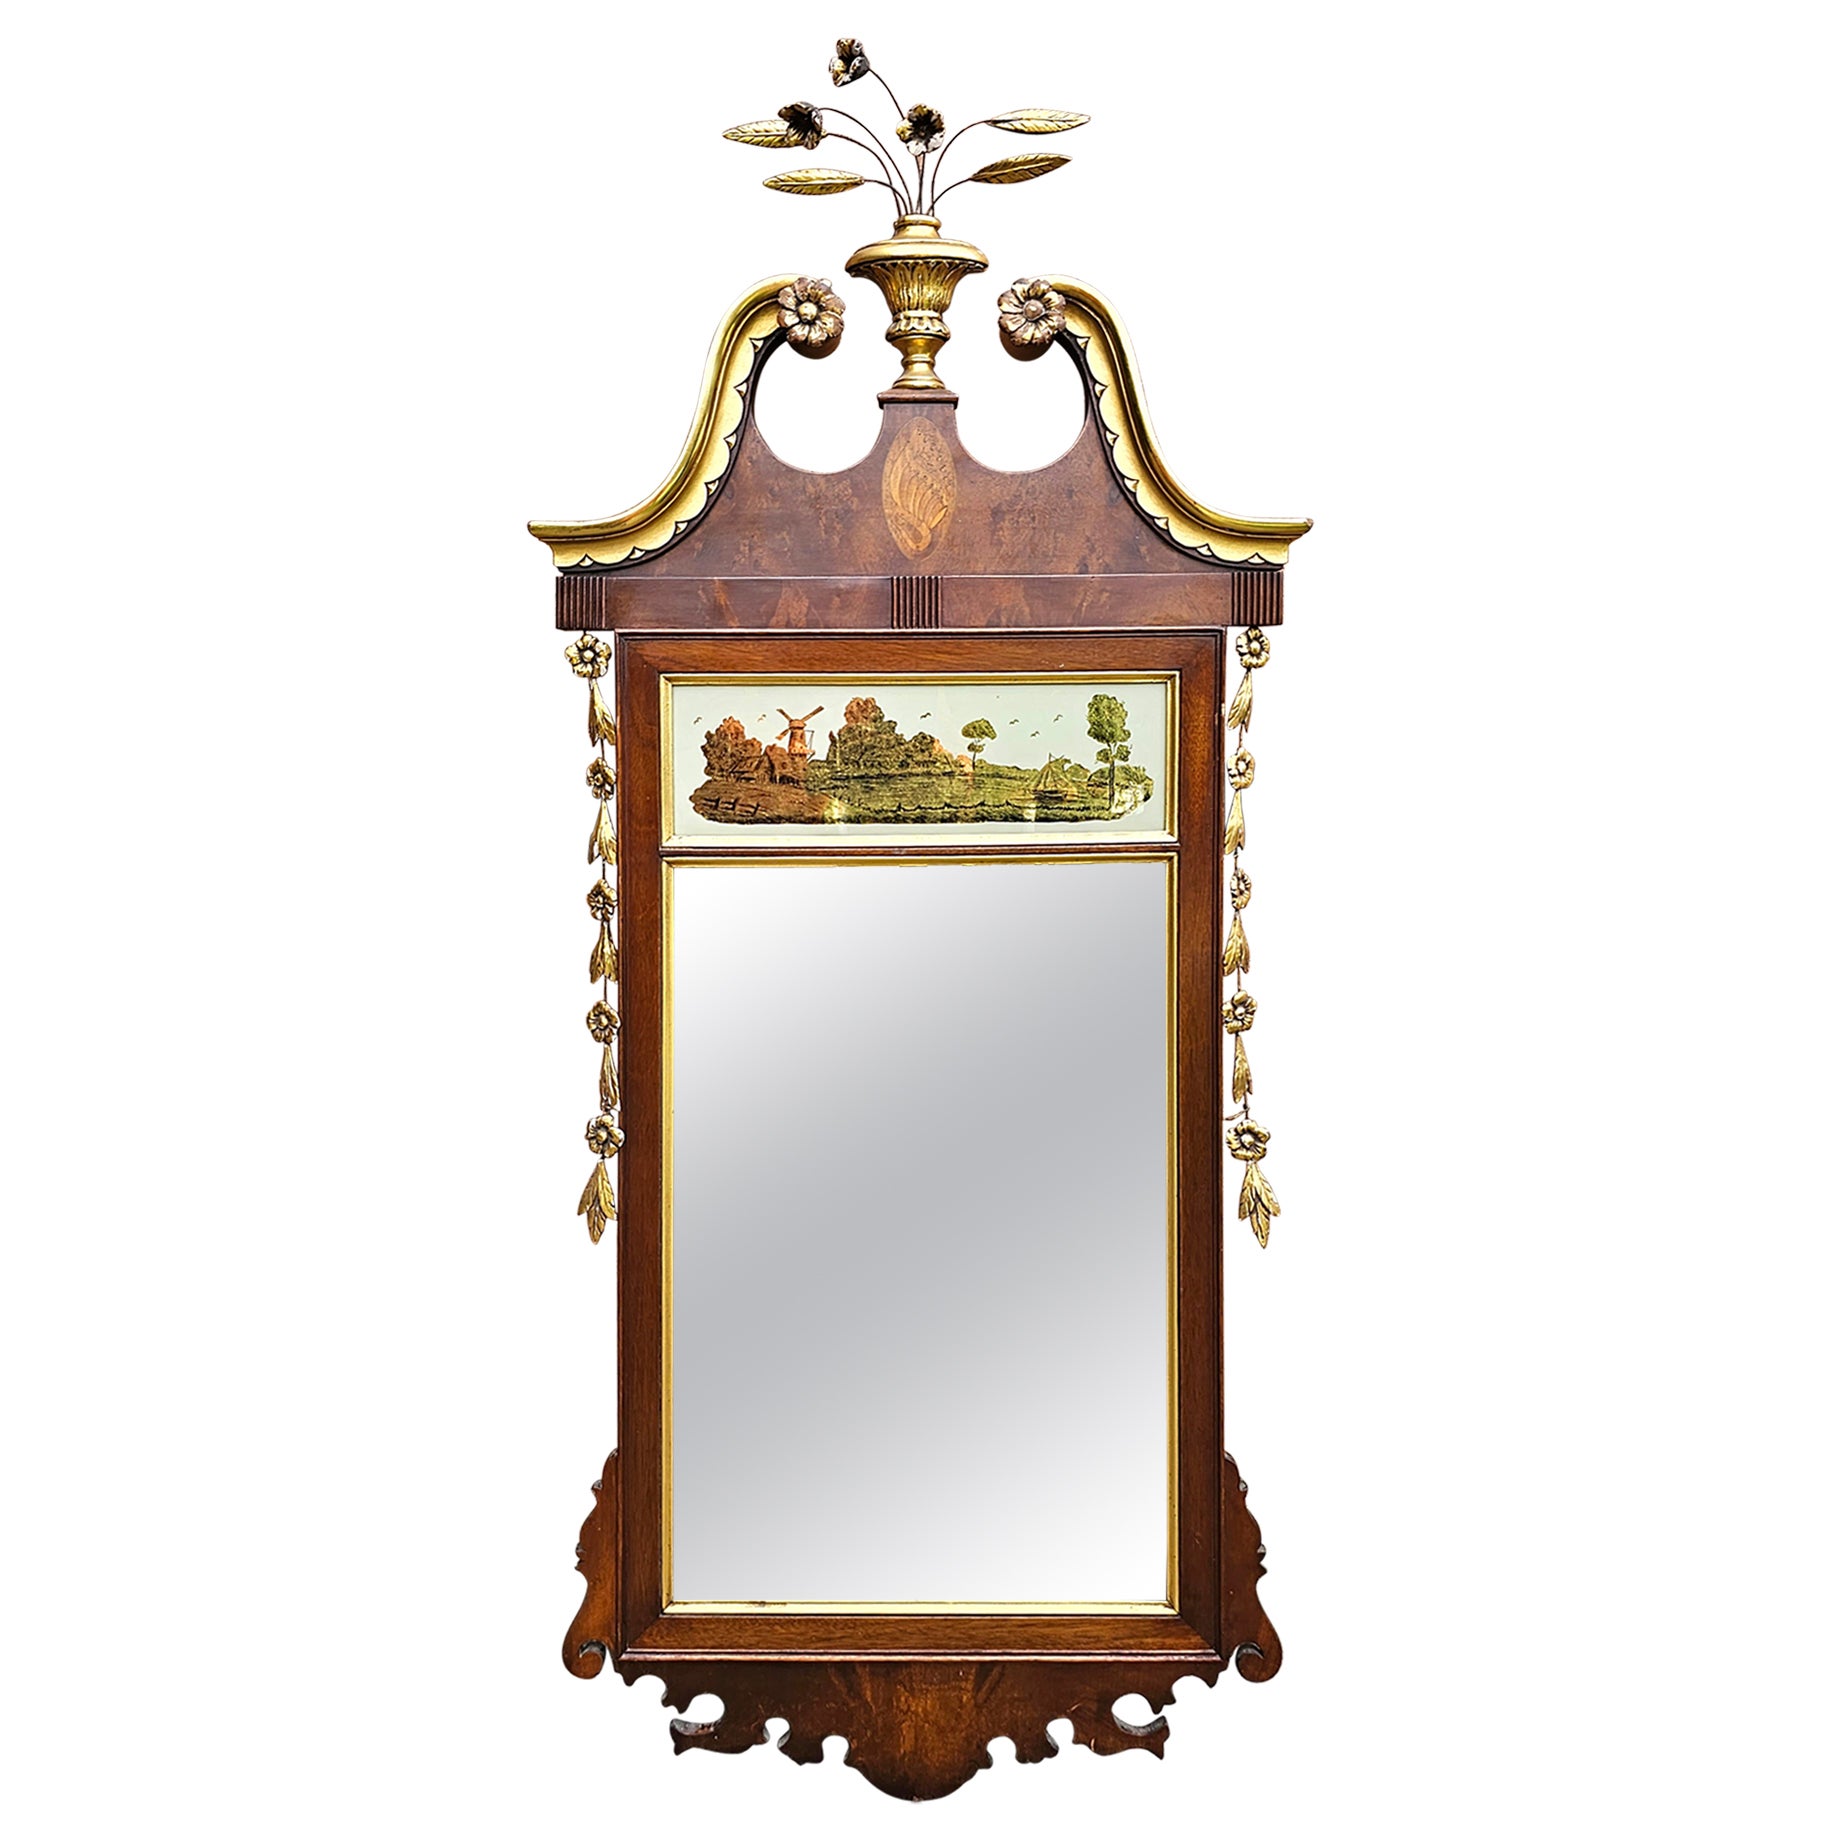 Federal Satinwood Inlaid Carved Mahogany Parcel Gilt And Eglomise Painted Mirror